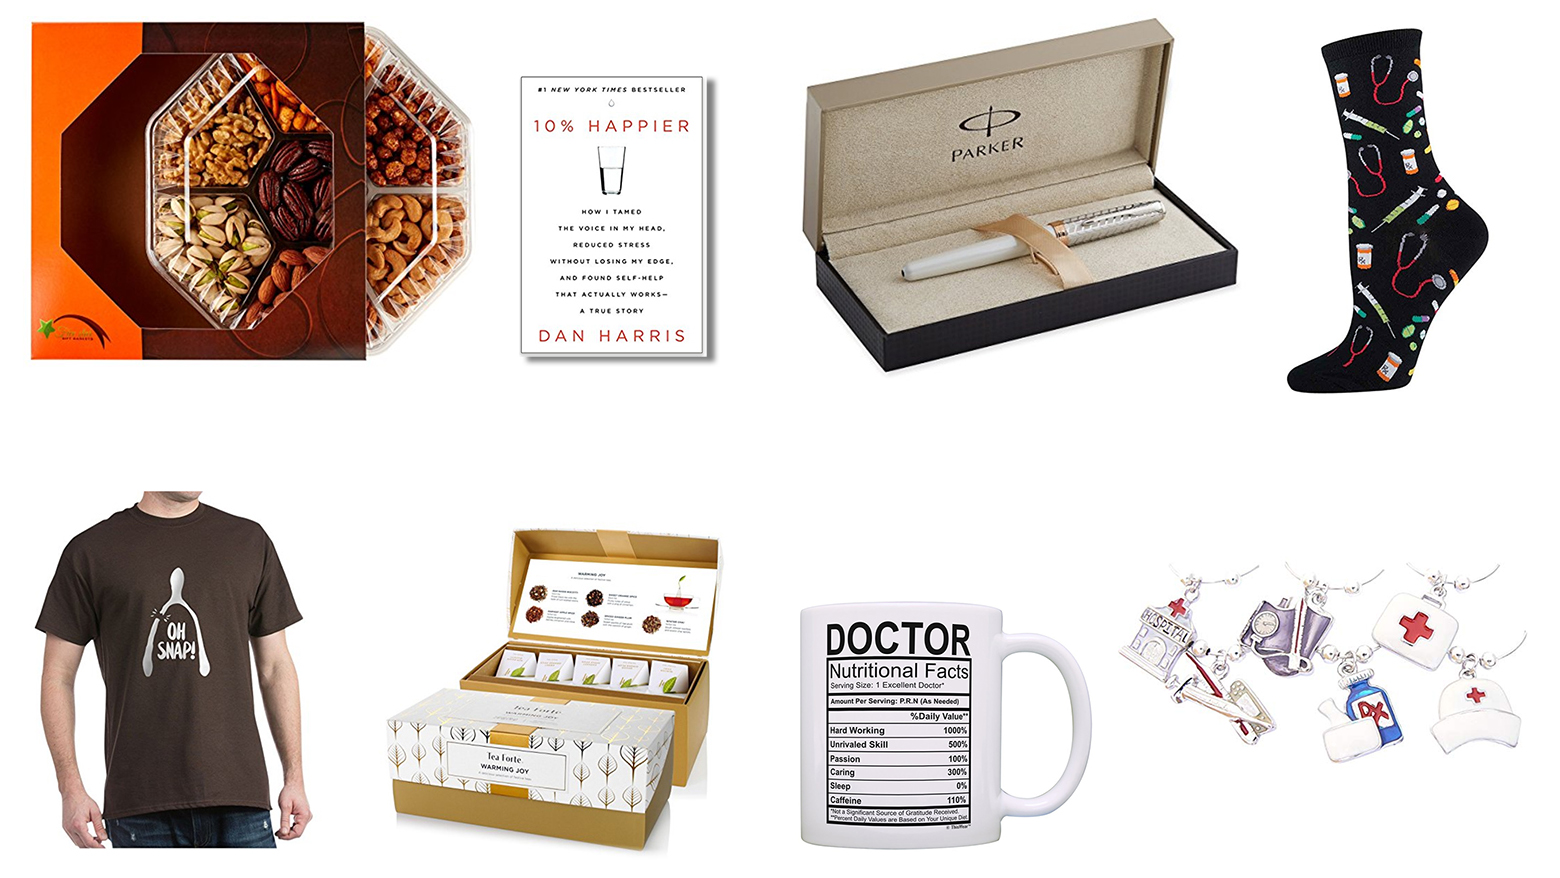 9 Thoughtful and Practical Gift Ideas for Doctors With Images | Doctor gifts,  Best gifts, Unusual gifts